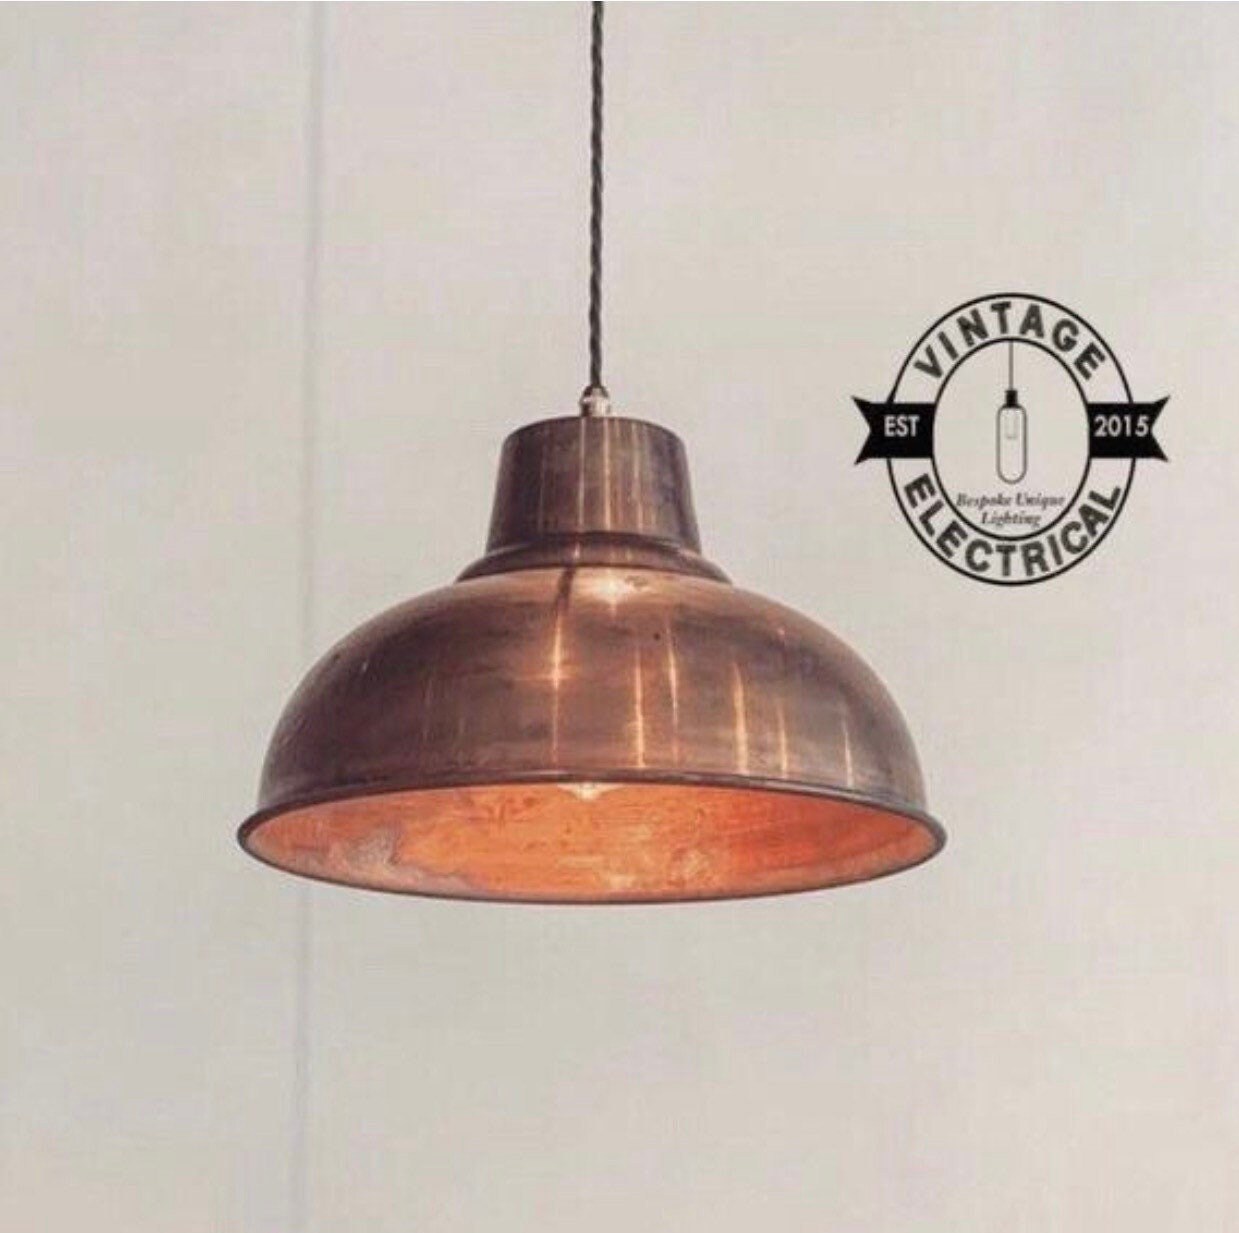 Salthouse XL ~ Copper Industrial Factory Shade | Ceiling Light | Dining Room | Kitchen Table | Vintage Filament Lamps Pendant 14.5 Inch